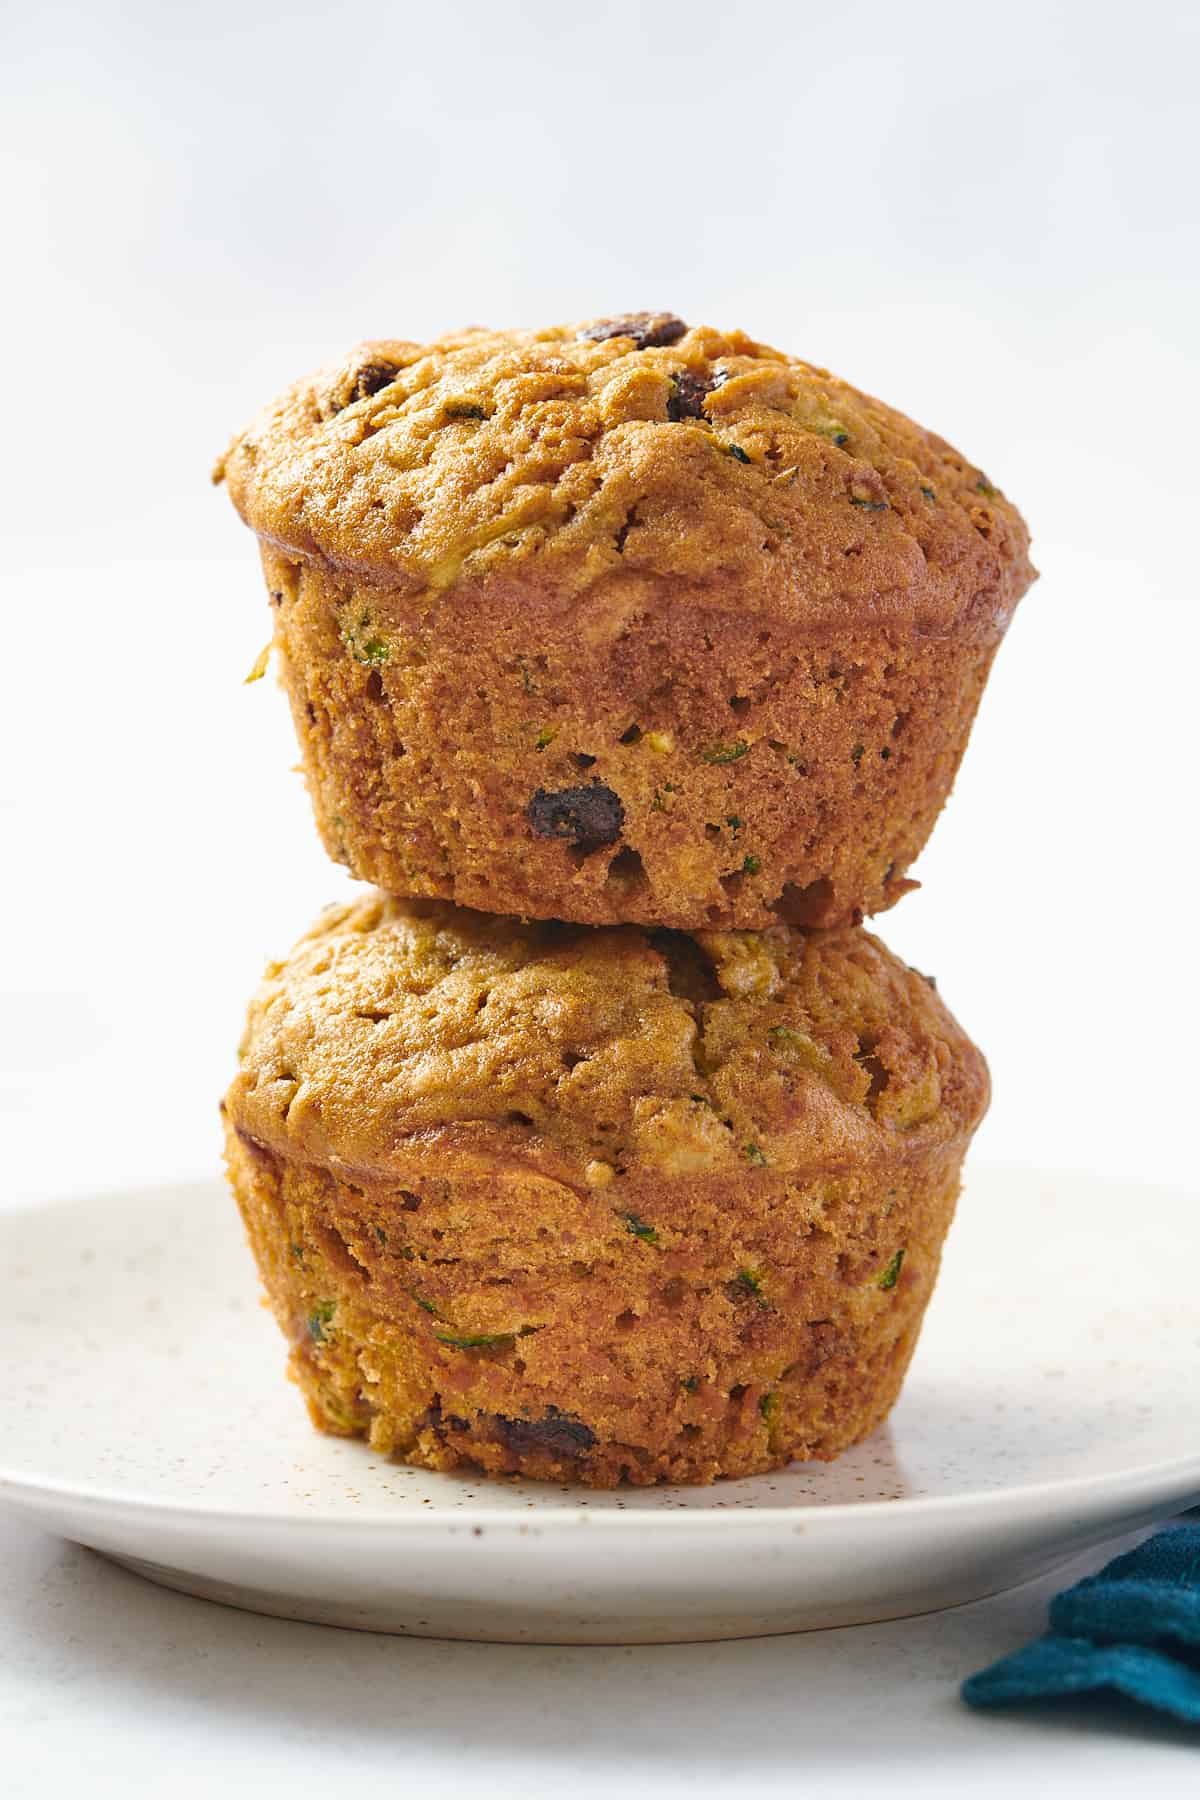 stack of two zucchini muffins sitting on a speckled plate